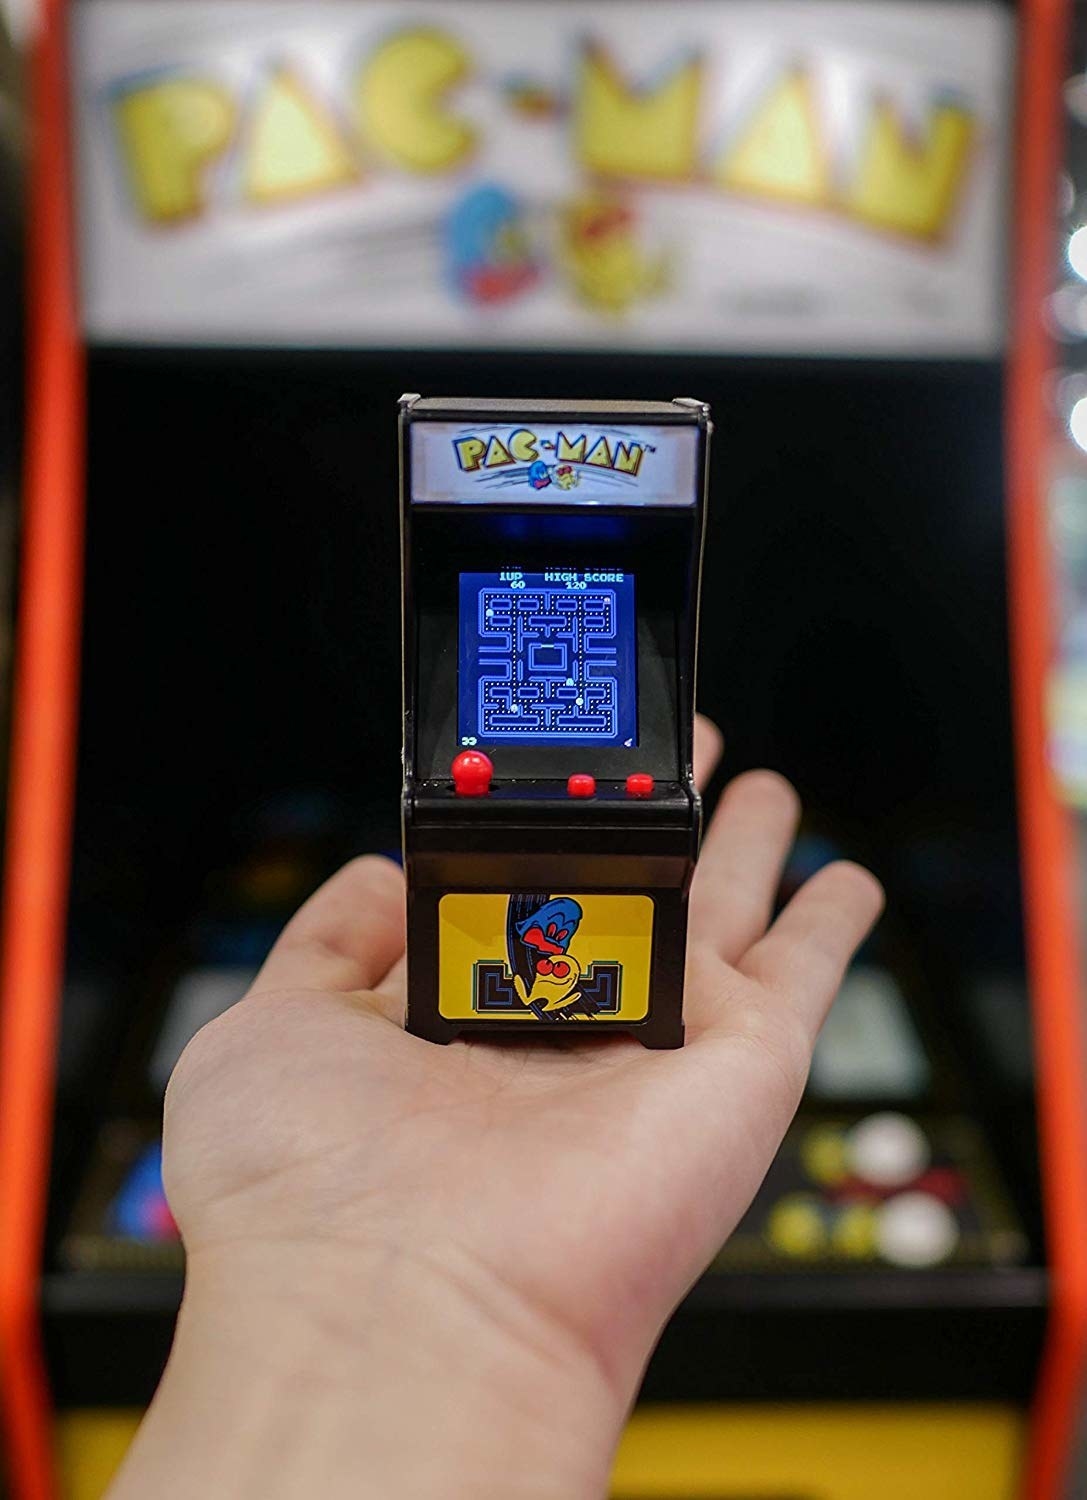 small Pac-Man-inspired playable arcade game